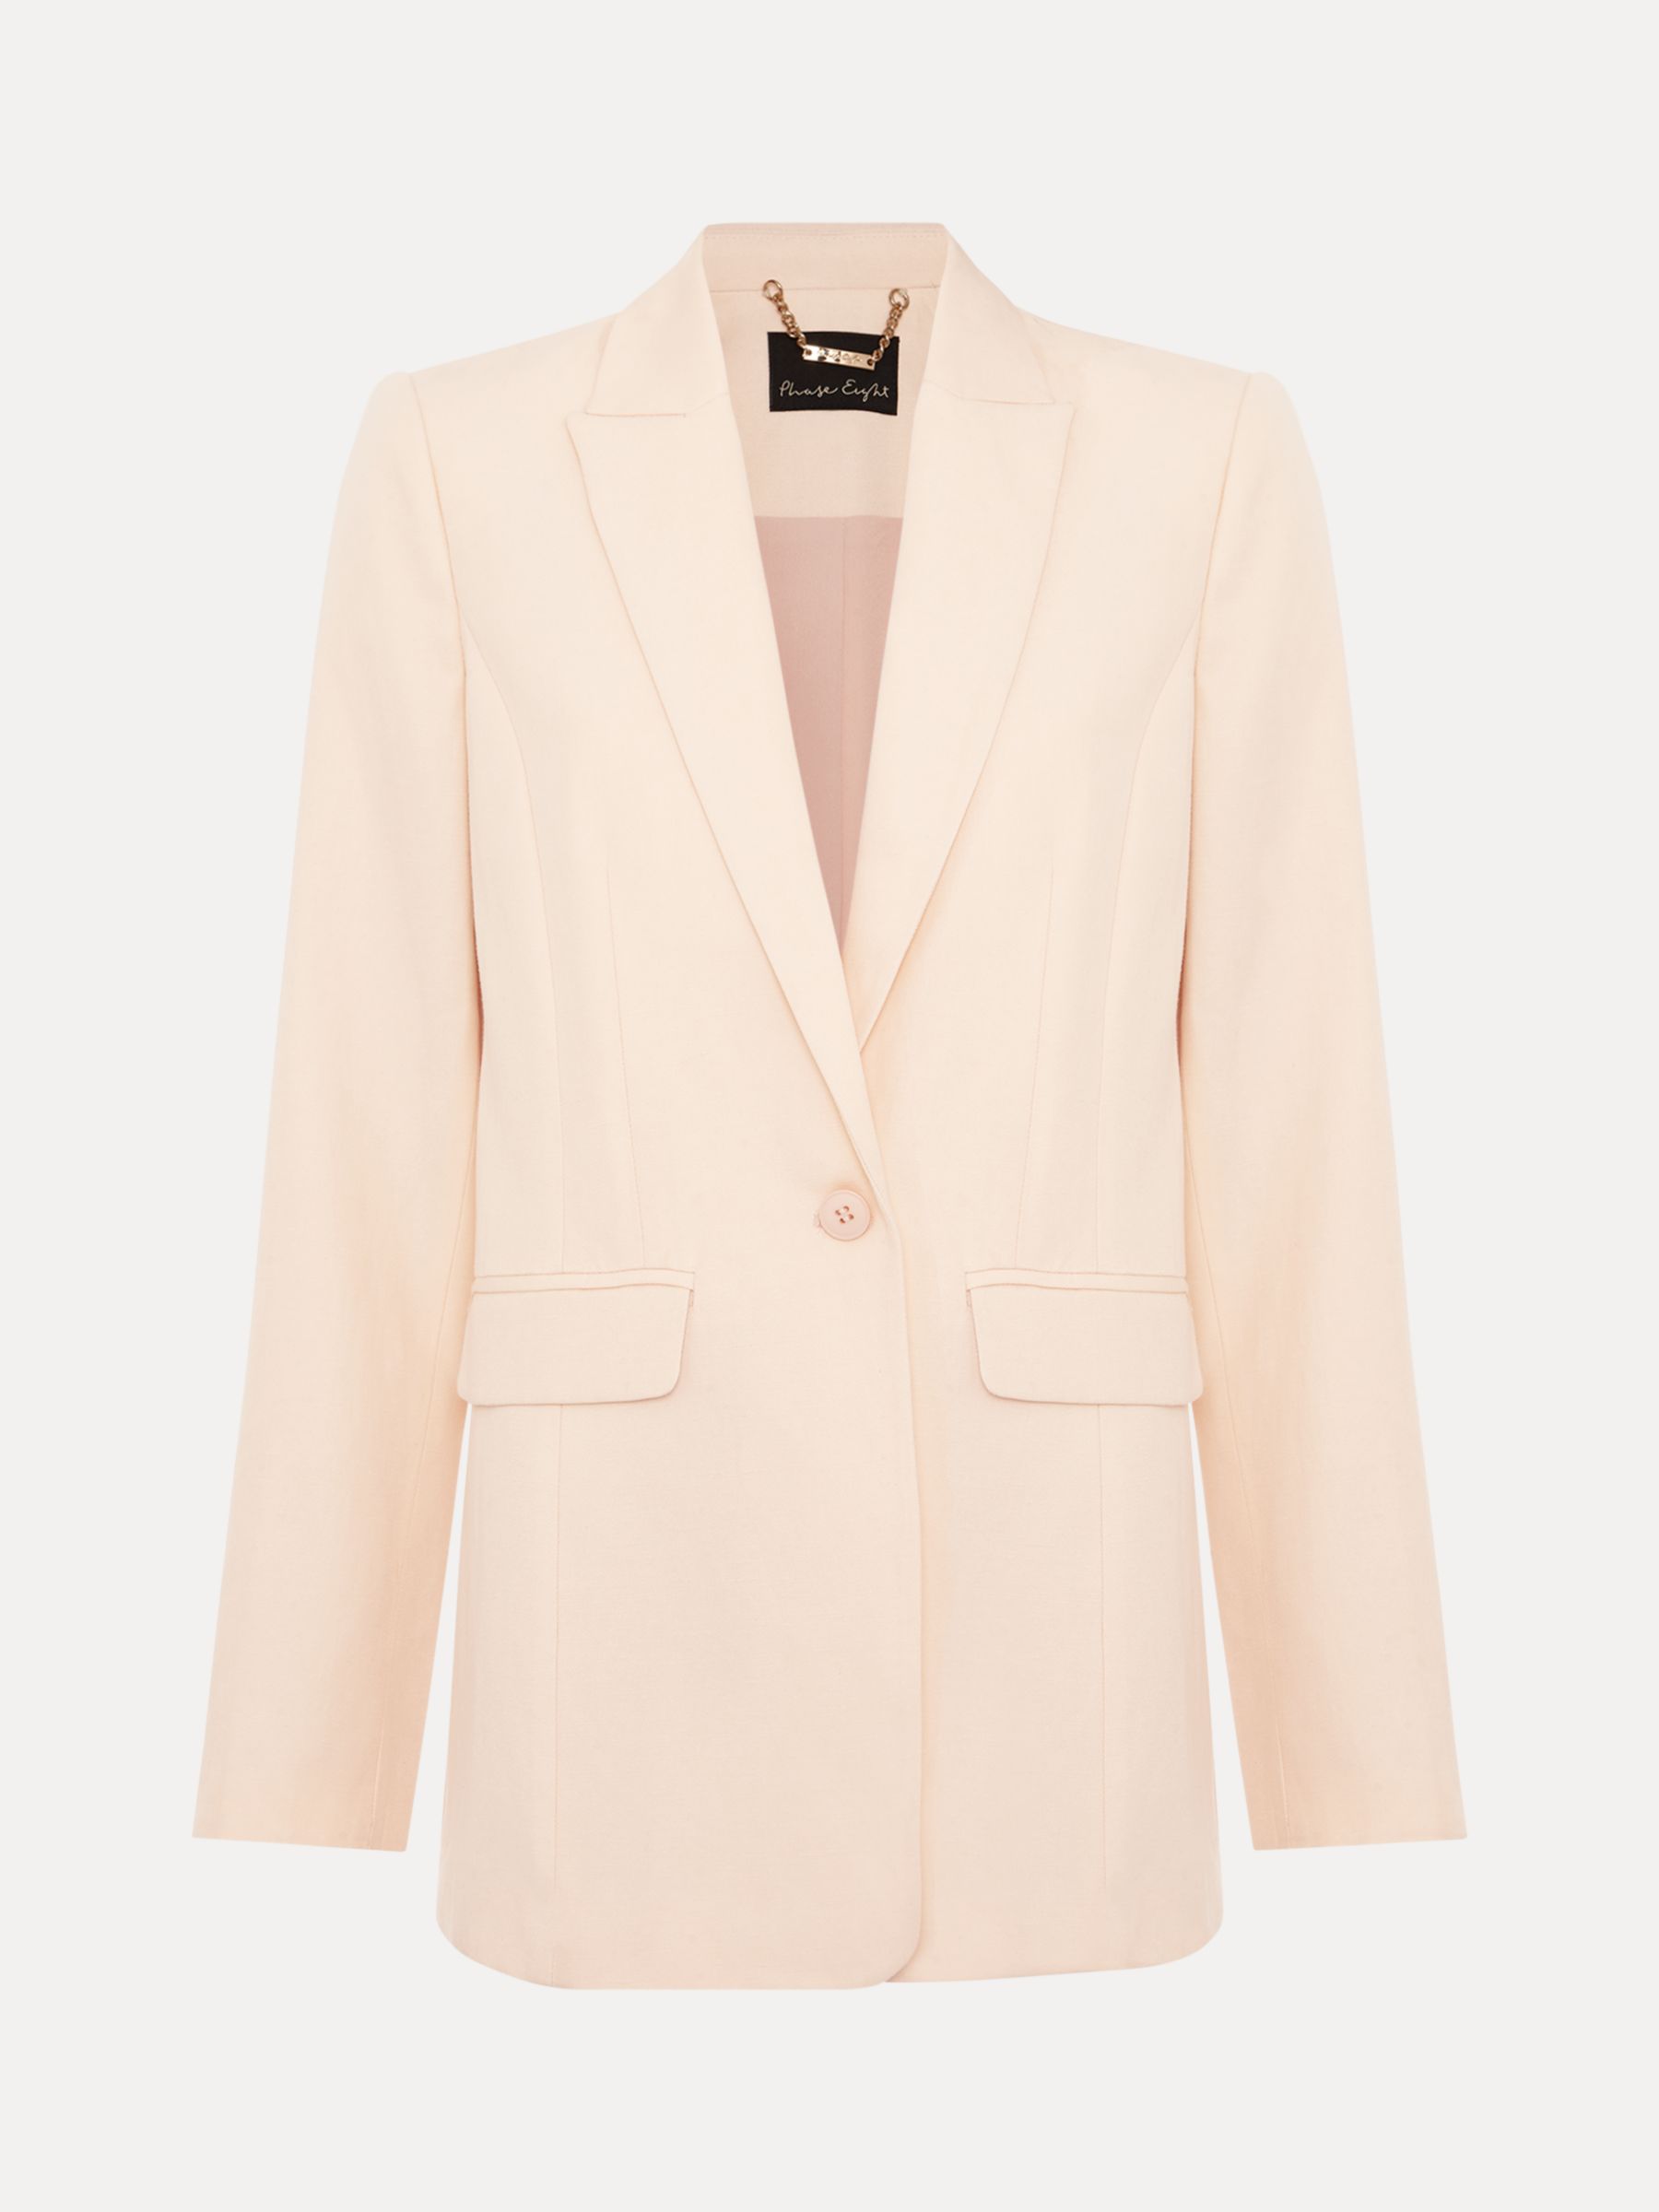 Phase Eight Bianca Suit Jacket, Soft Peach, 8